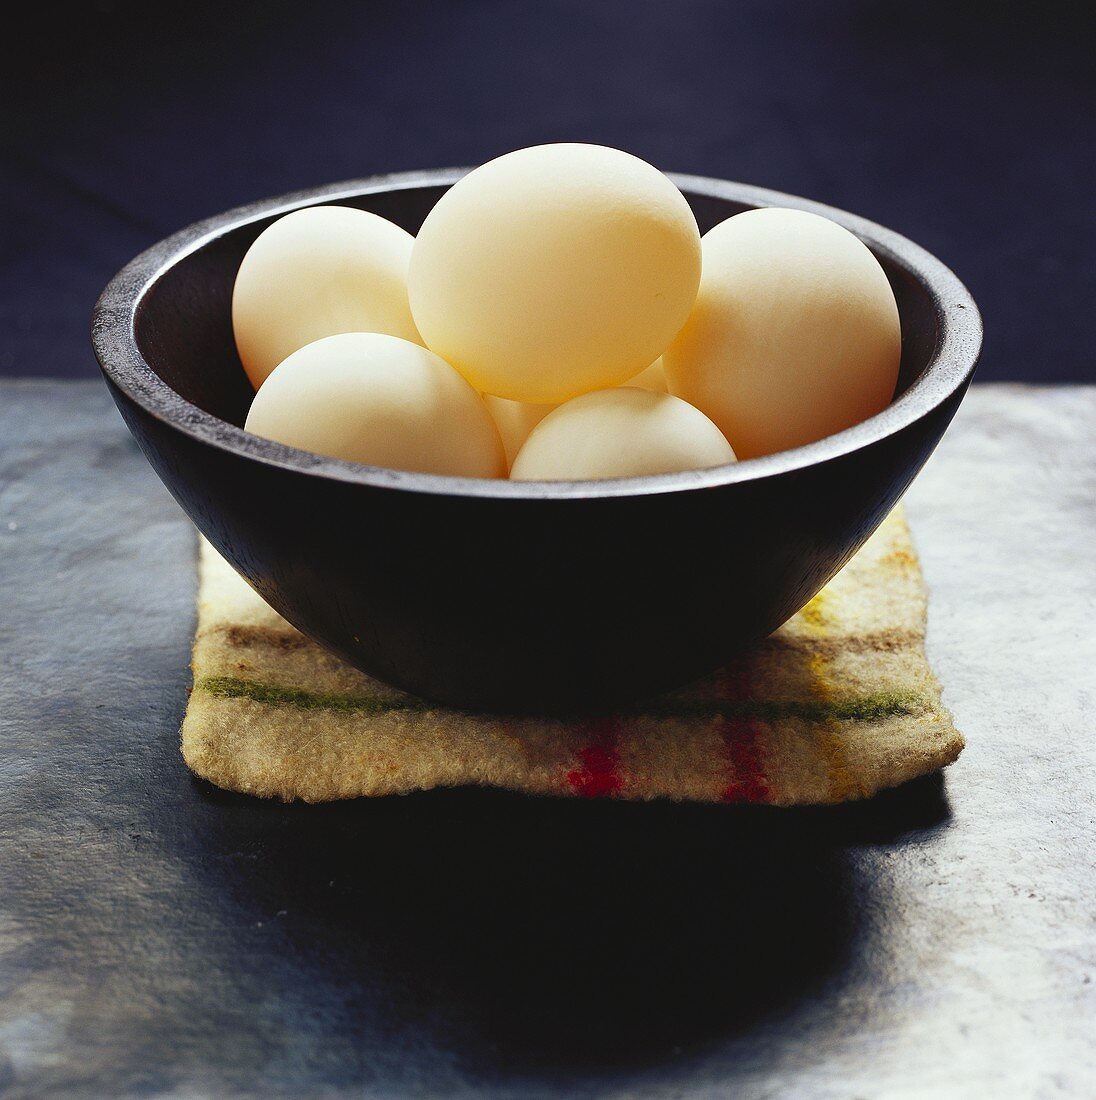 Several hen's eggs in a bowl